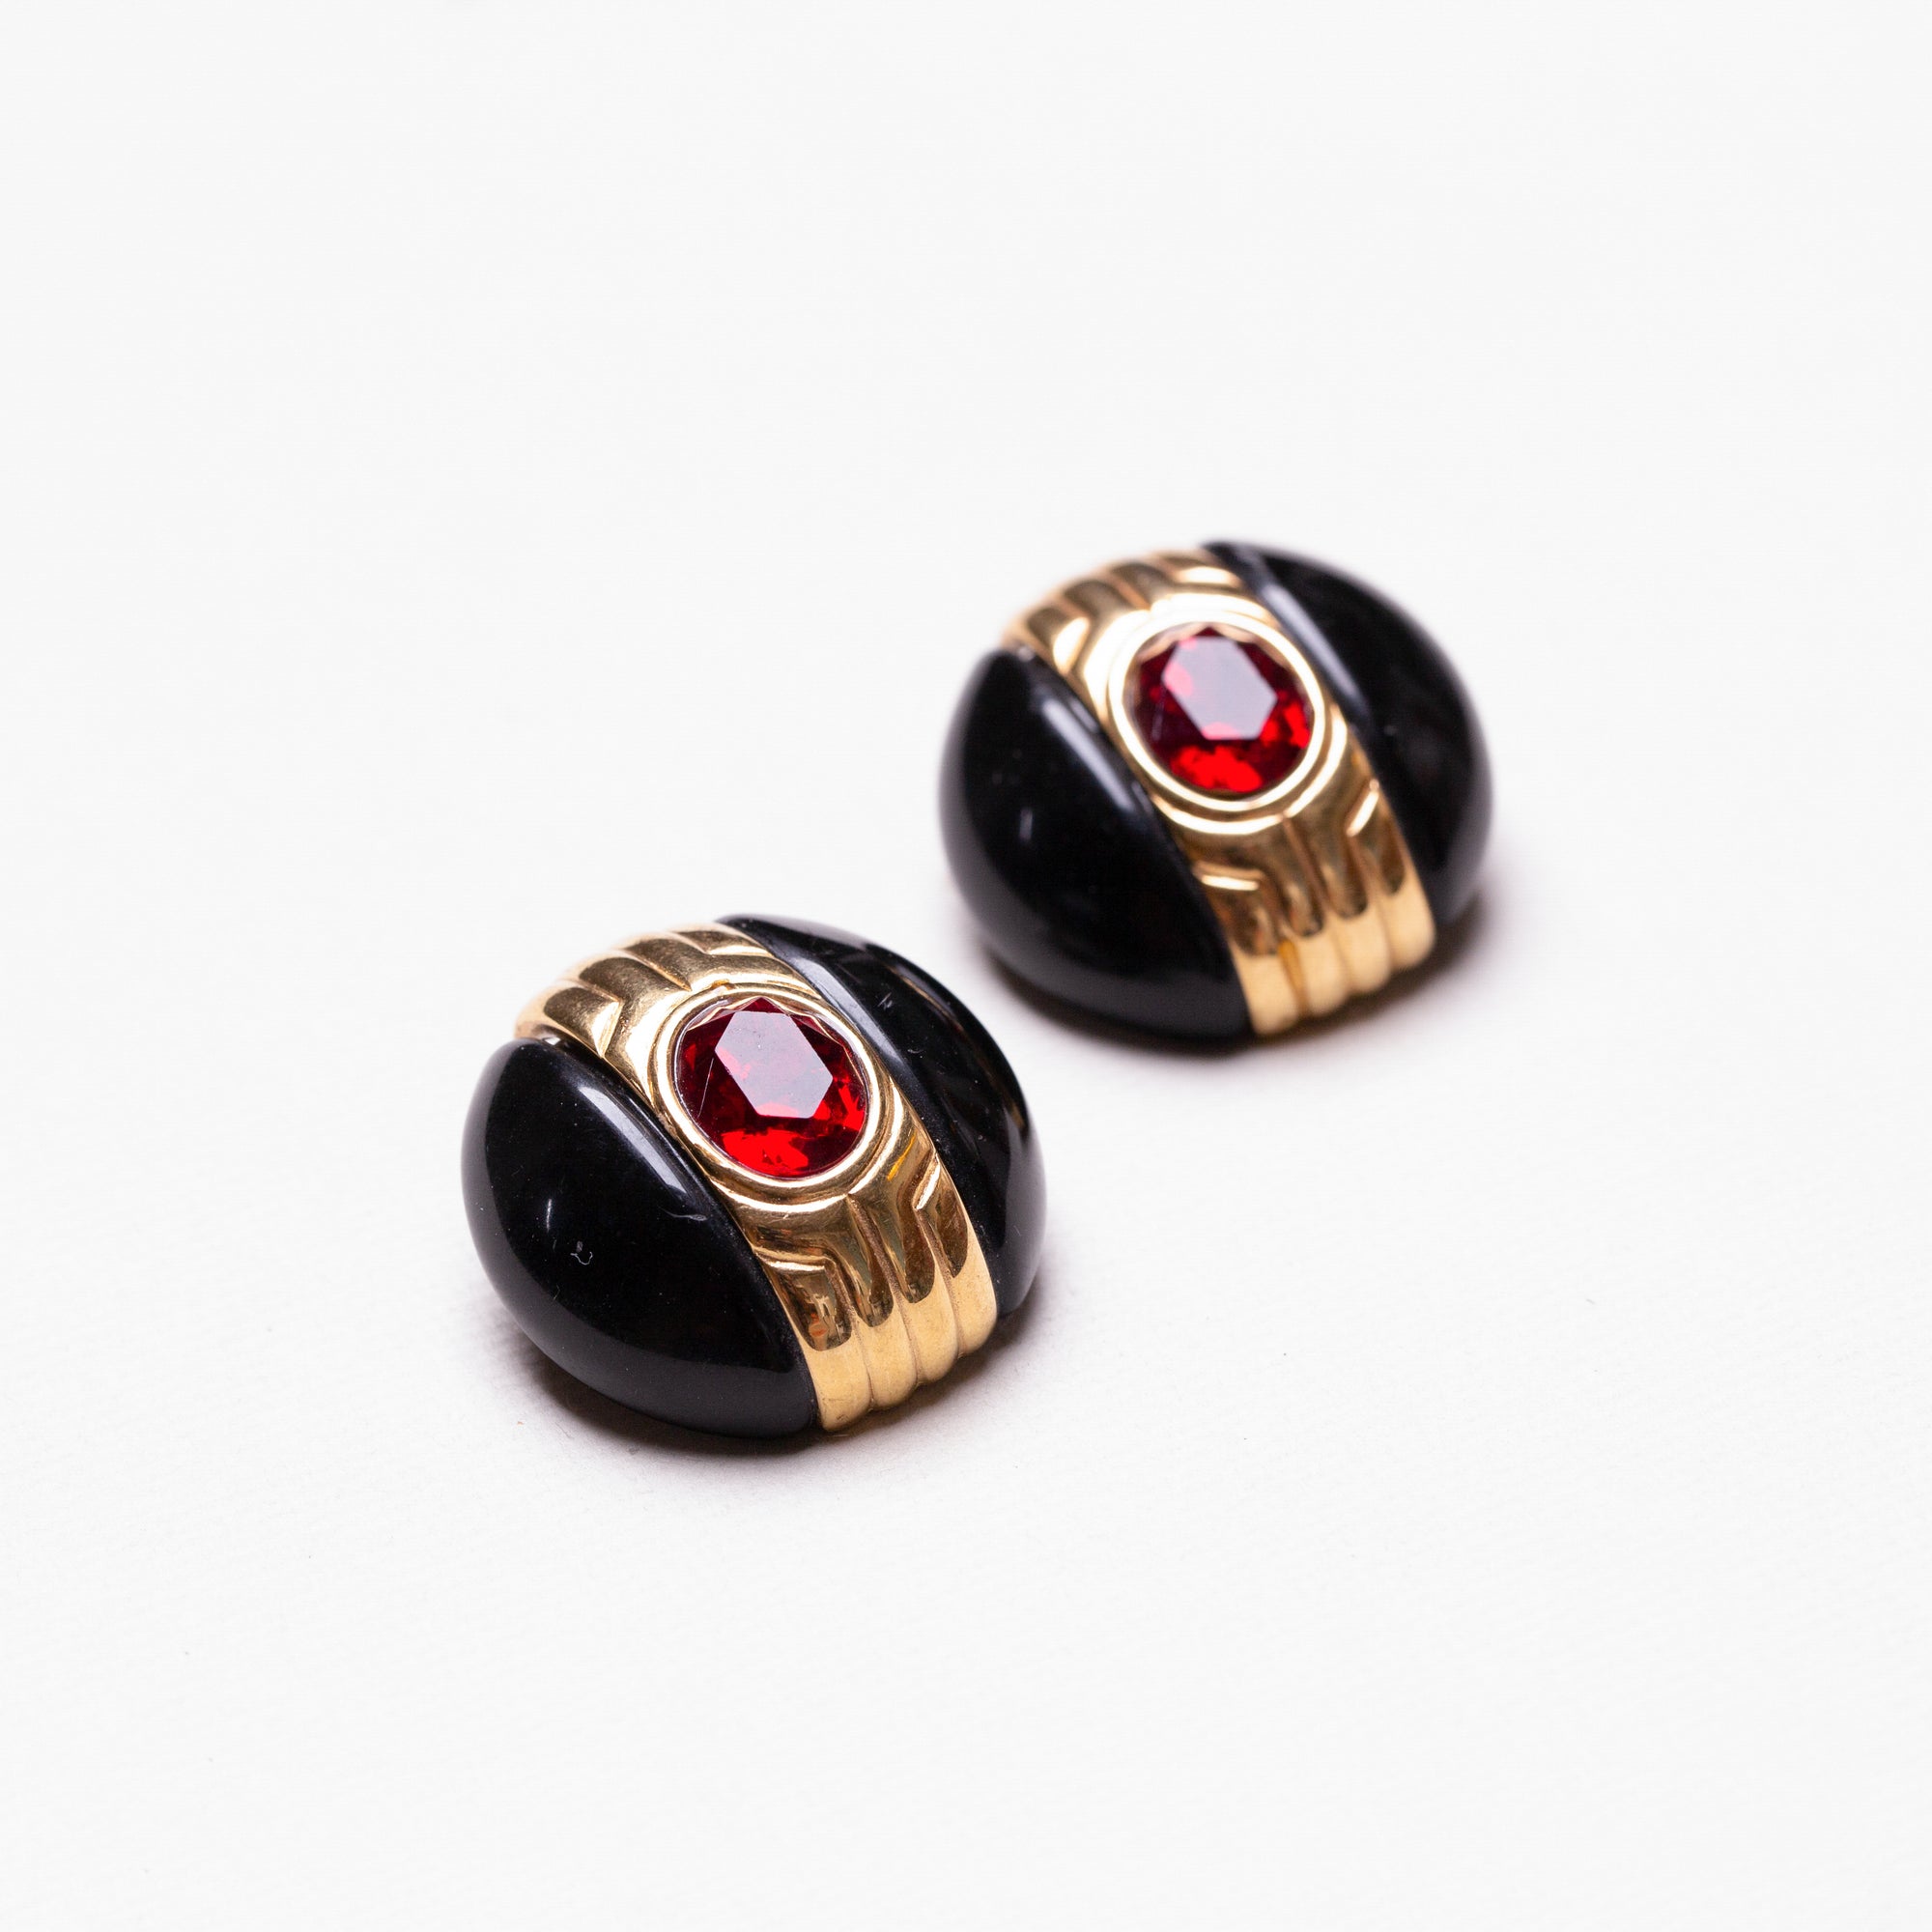 Vintage Givenchy Black Enamel and Red Stone Earrings